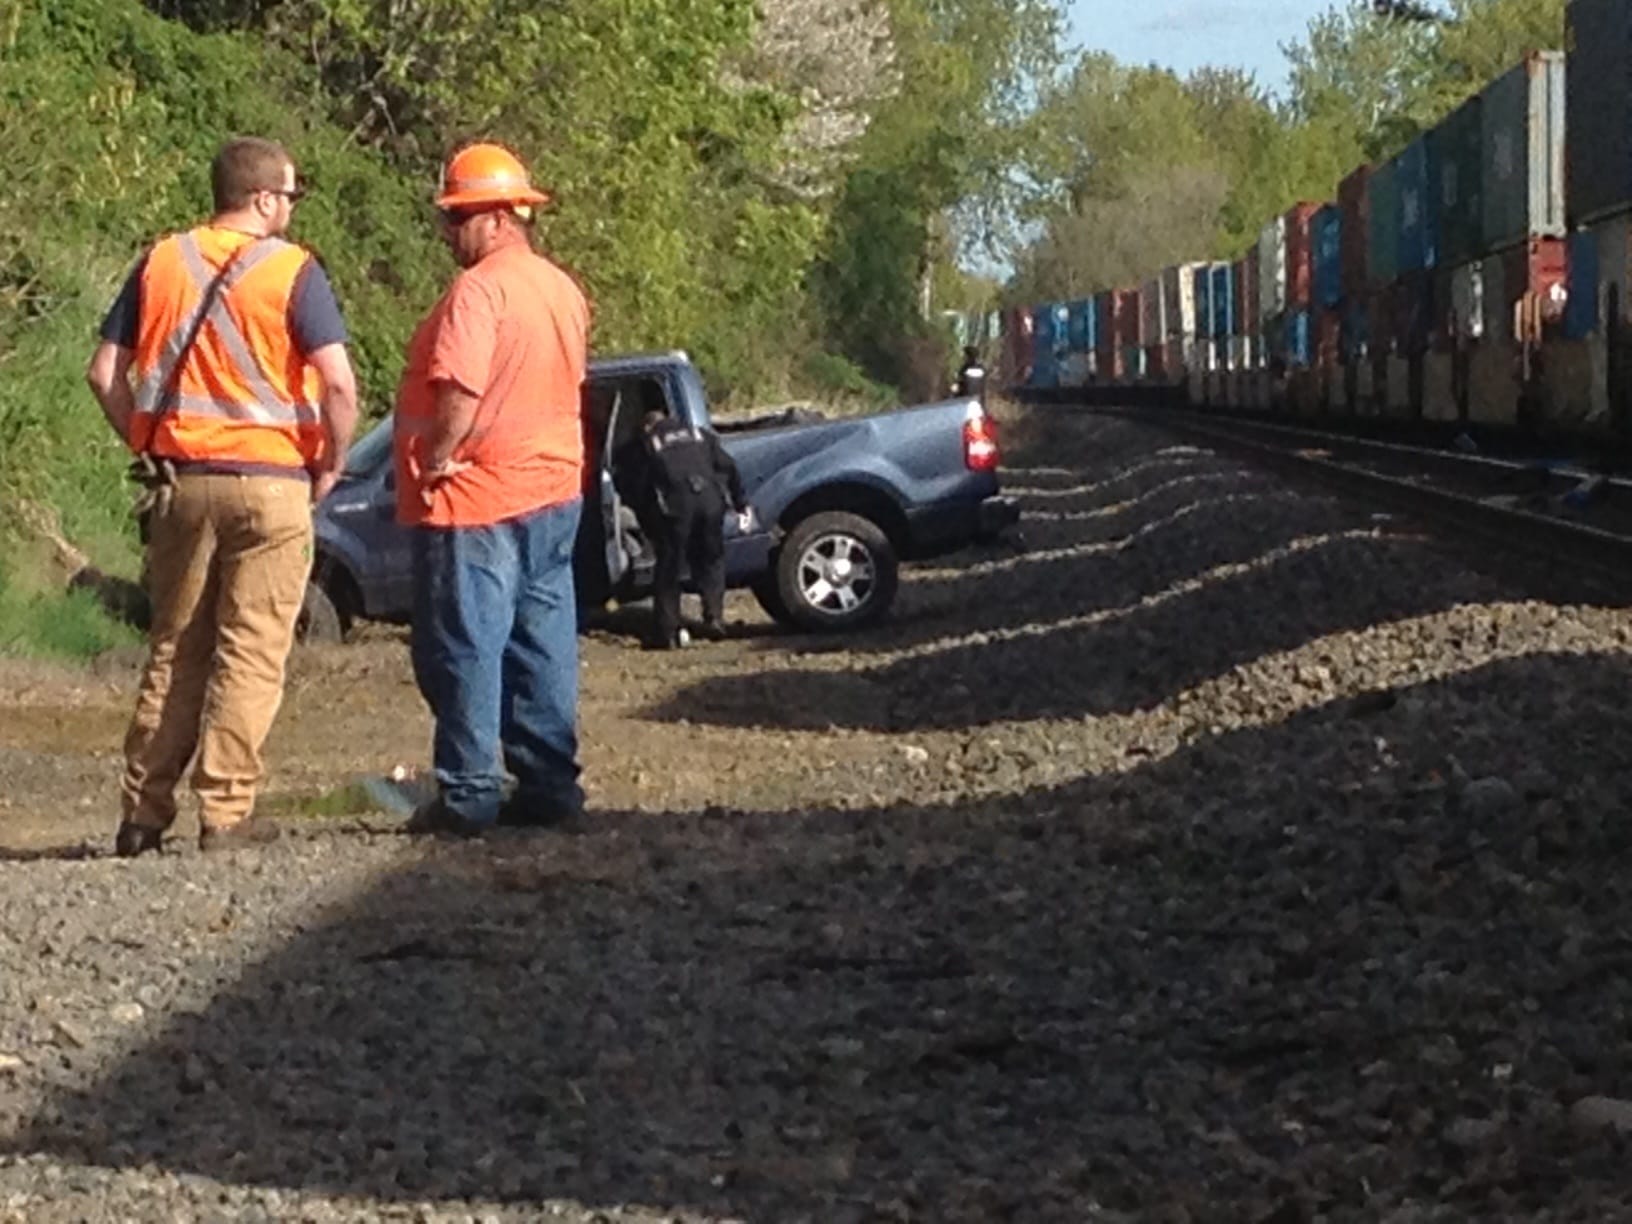 A Ford F-250 was struck by a train Friday afternoon on the railway near Wintler Park in Vancouver.